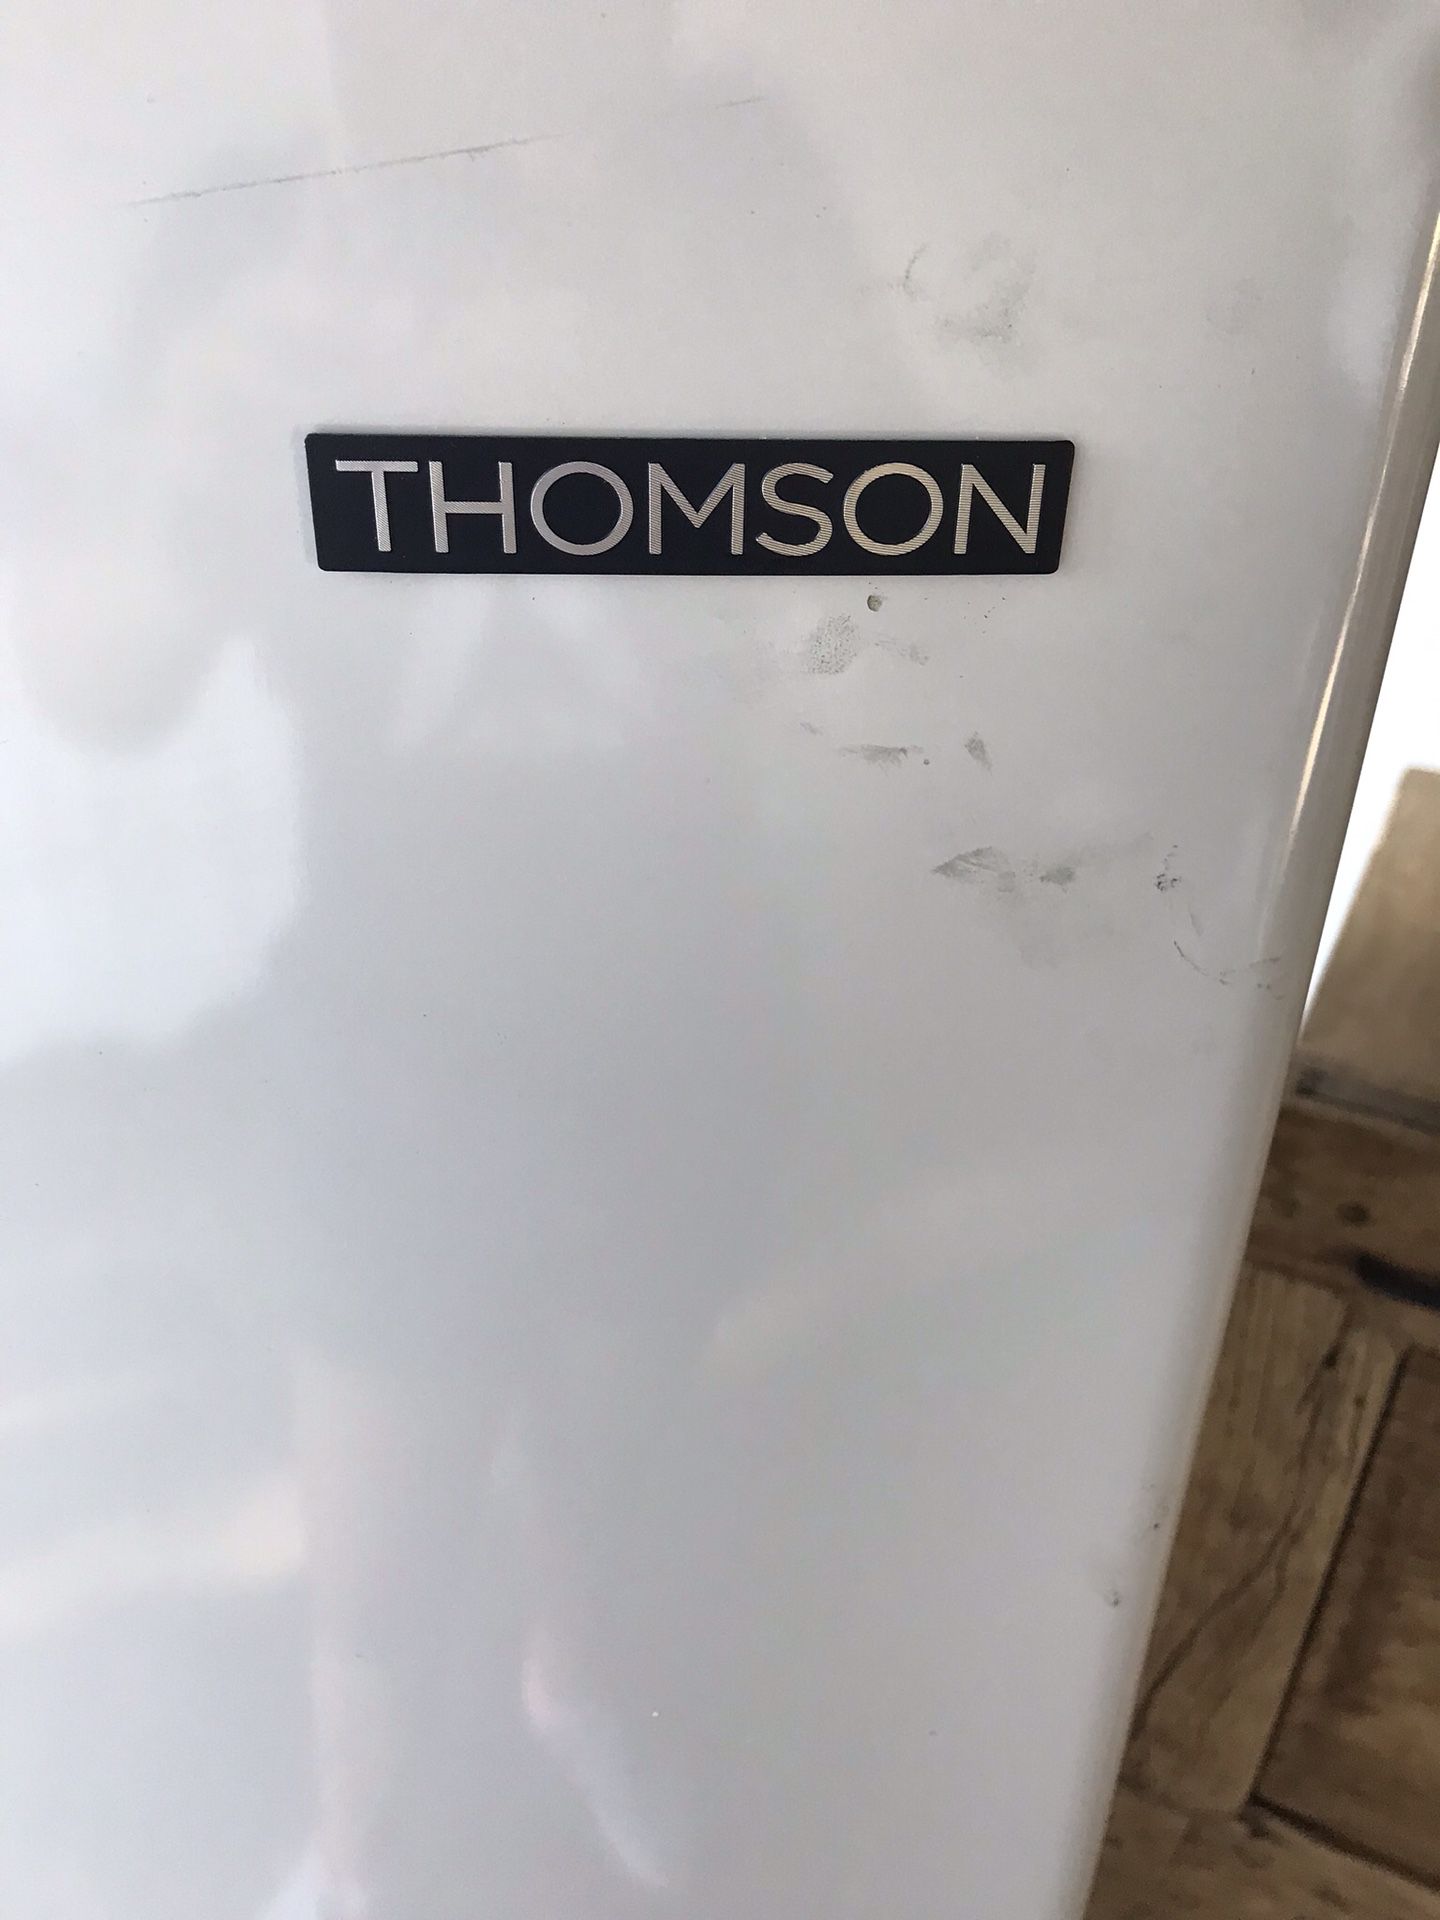 Thomson Upright Freezer-Doesn’t freeze, use for parts